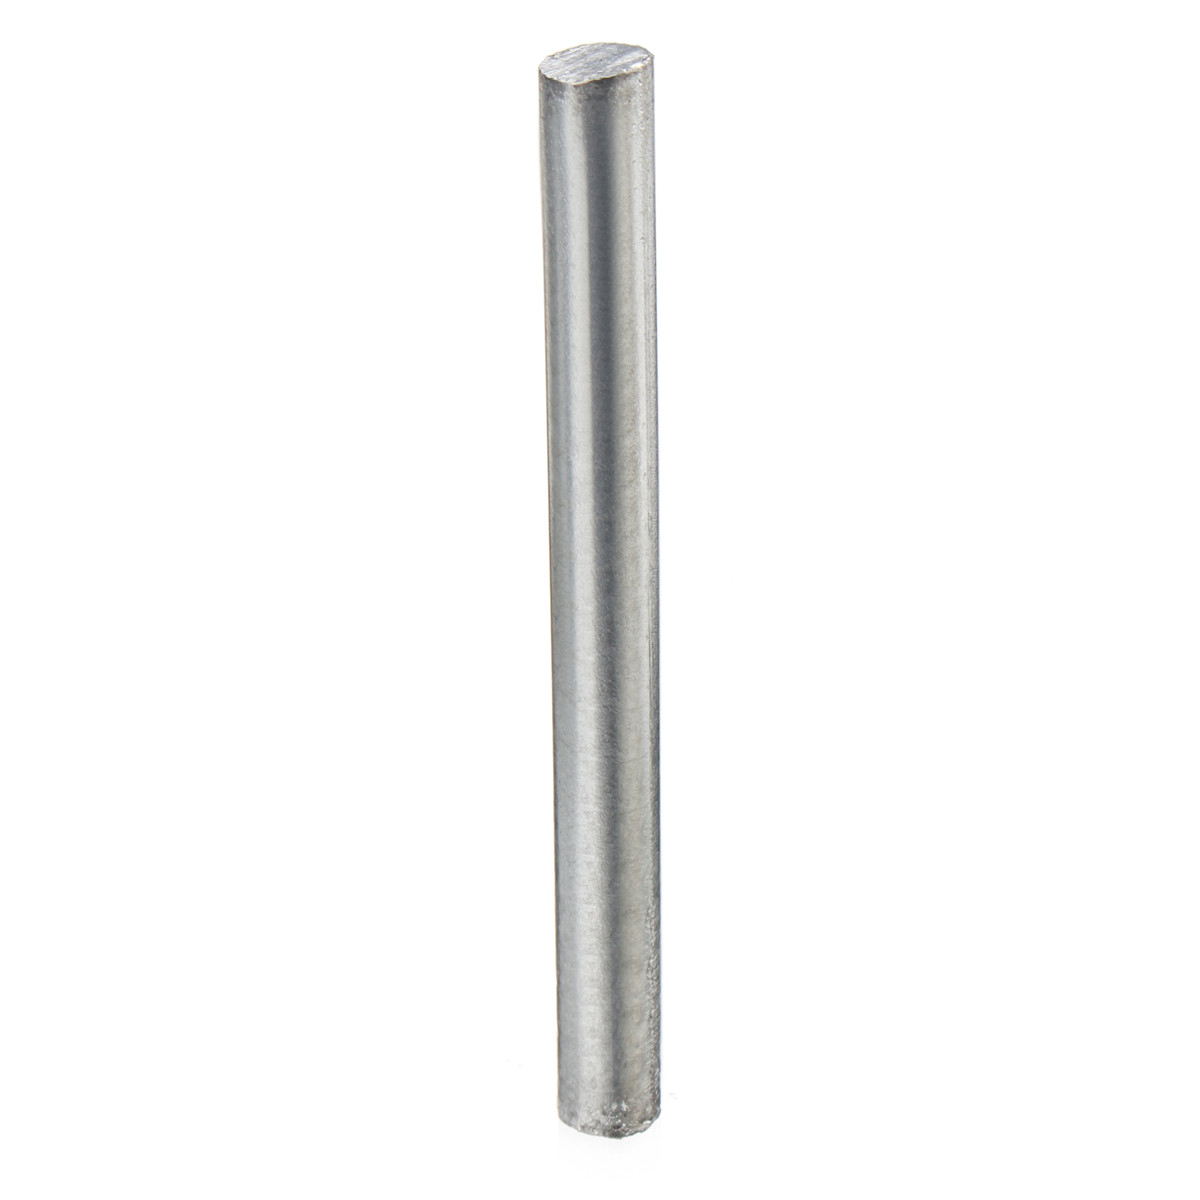 04-inch-x-4-inch-High-Purity-Zn-9995-Zinc-Metal-Rod-Anode-Electroplating-Solid-Round-Bar-1396373-4